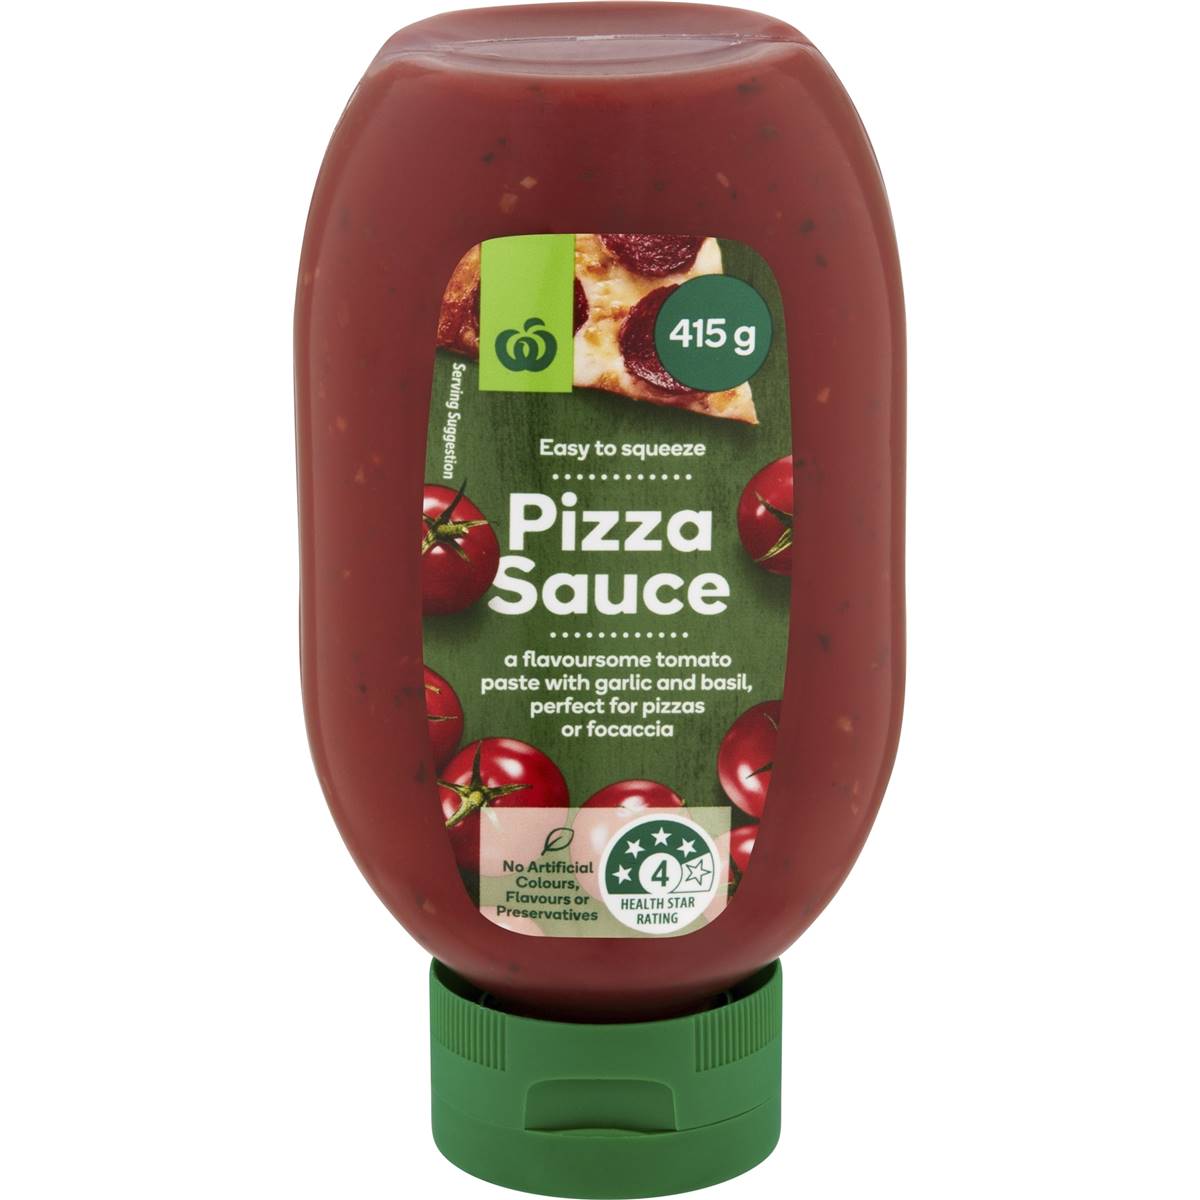 Calories in Woolworths Pizza Sauce Squeeze Bottle